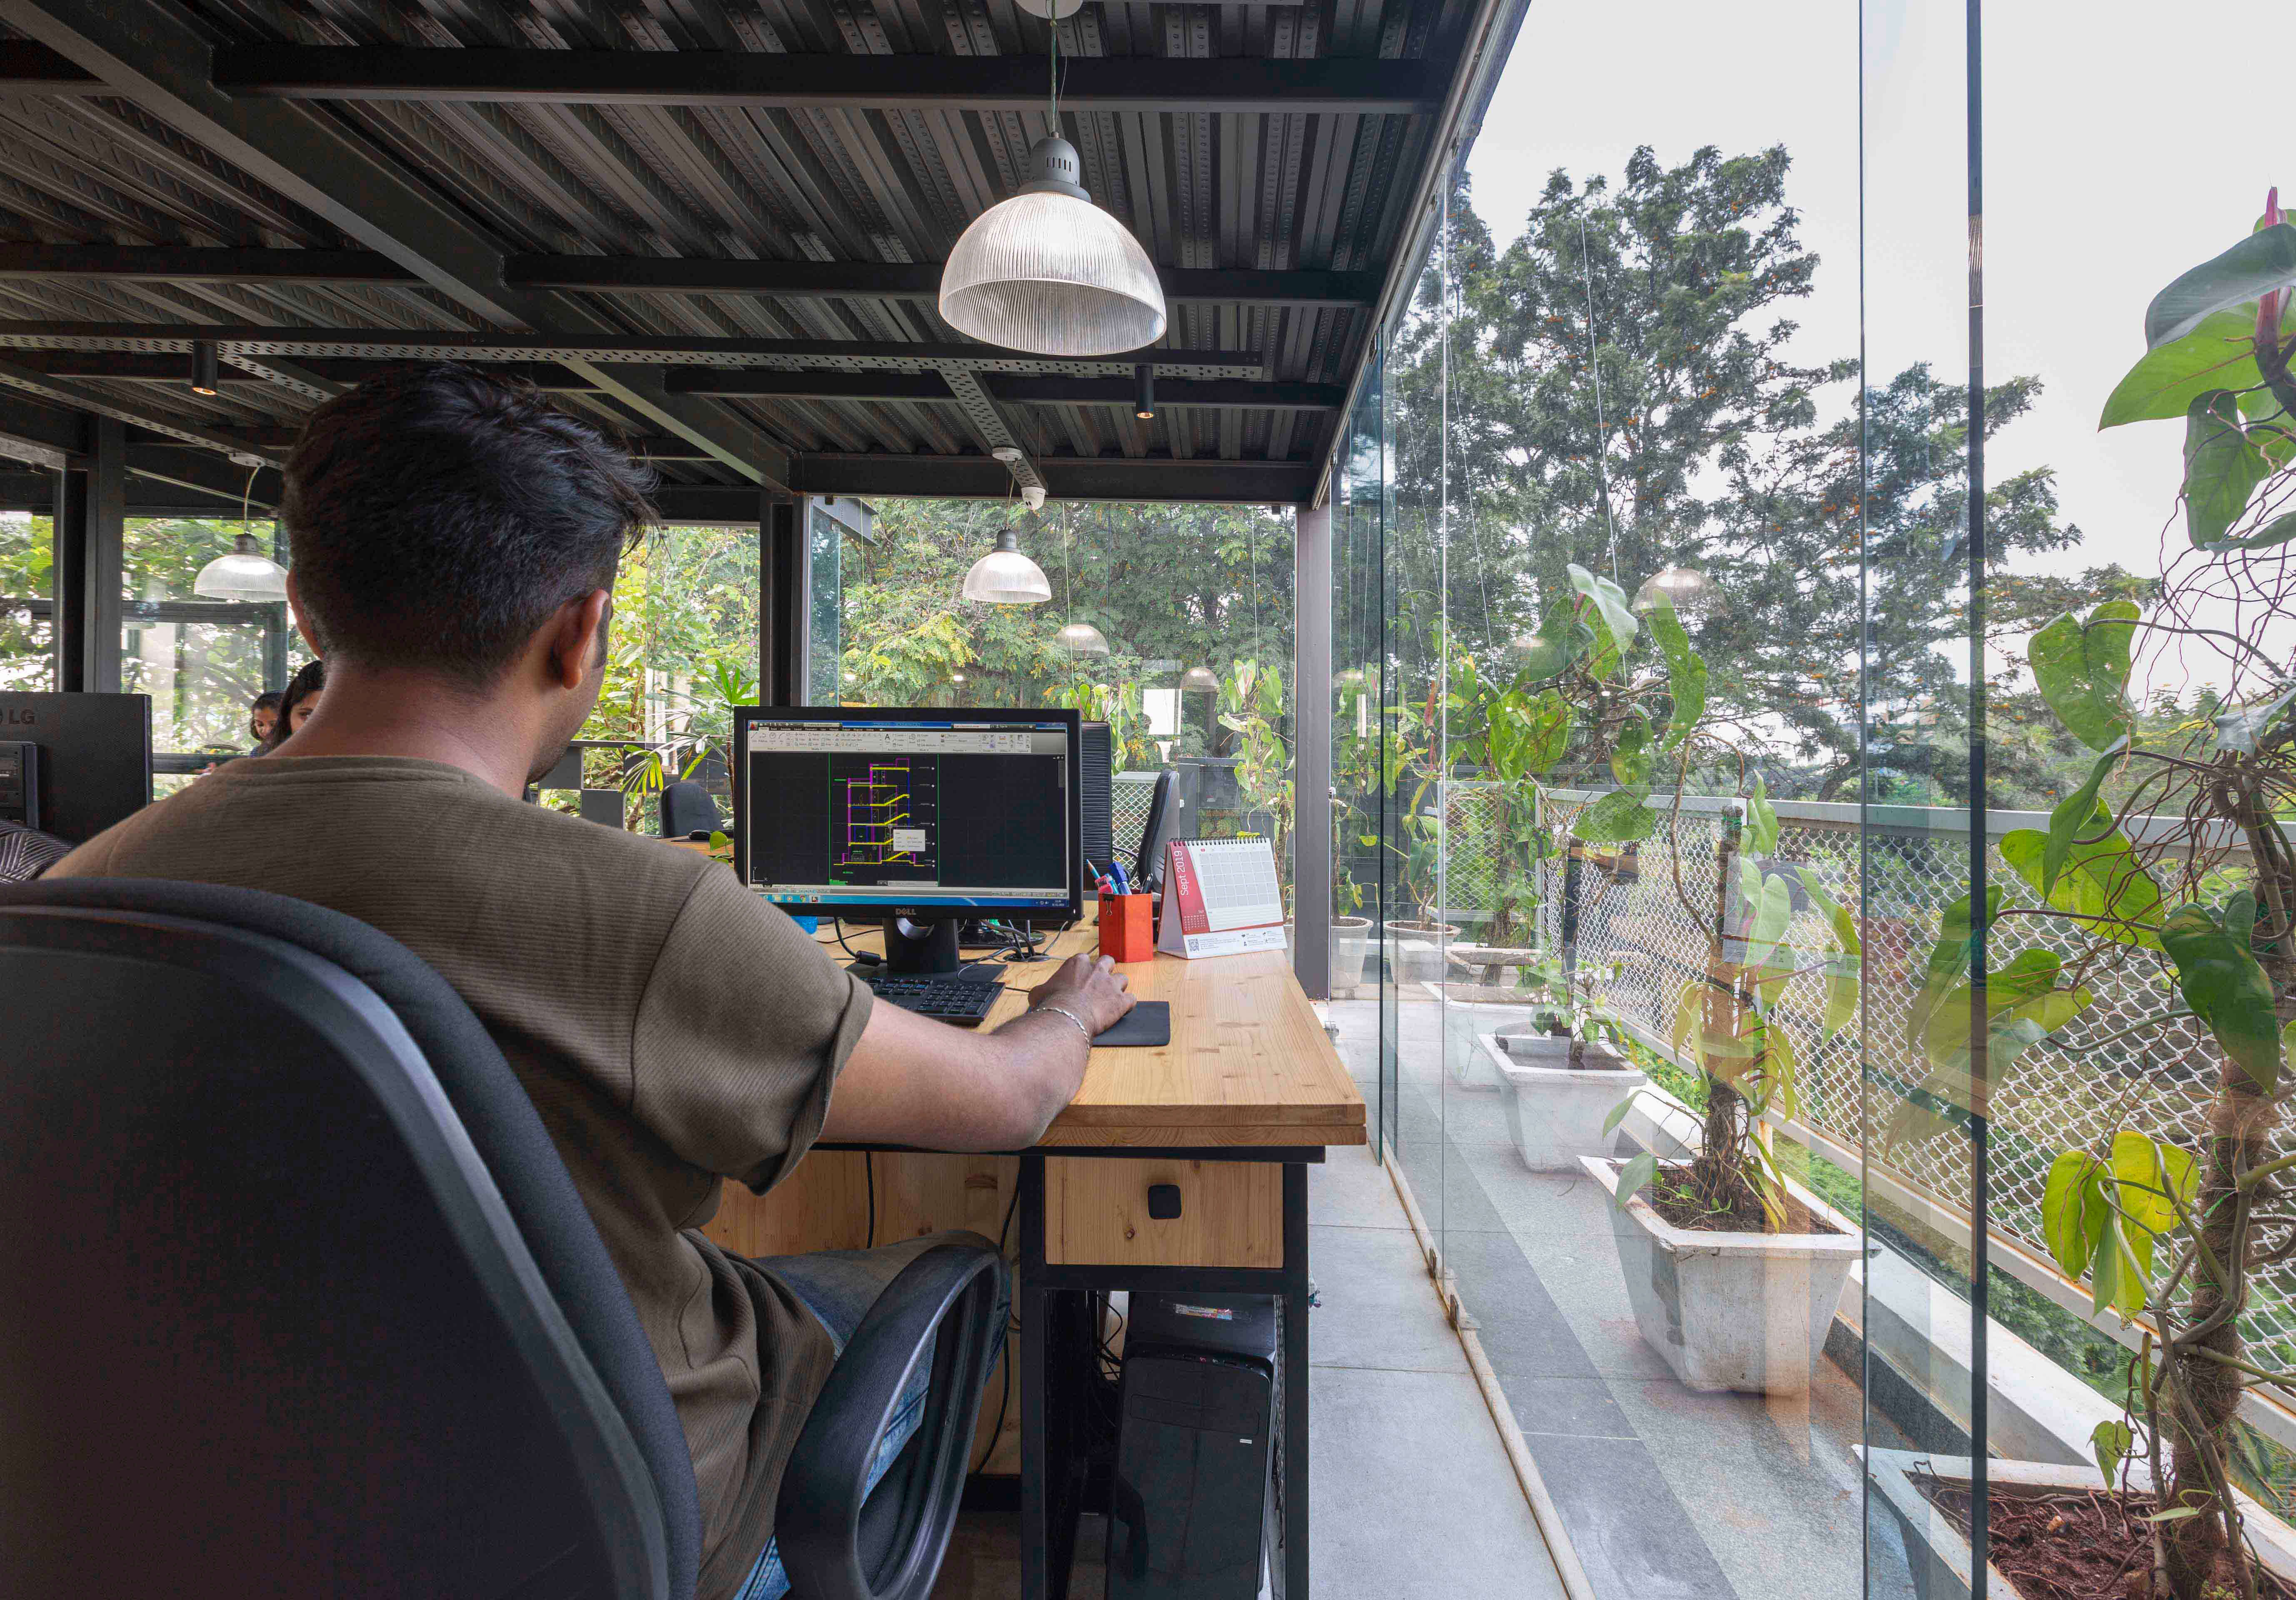 Indoor potted plants and seamless connectivity to the exterior green surroundings help in improve air quality, lower stress and has a calming effect on the employees